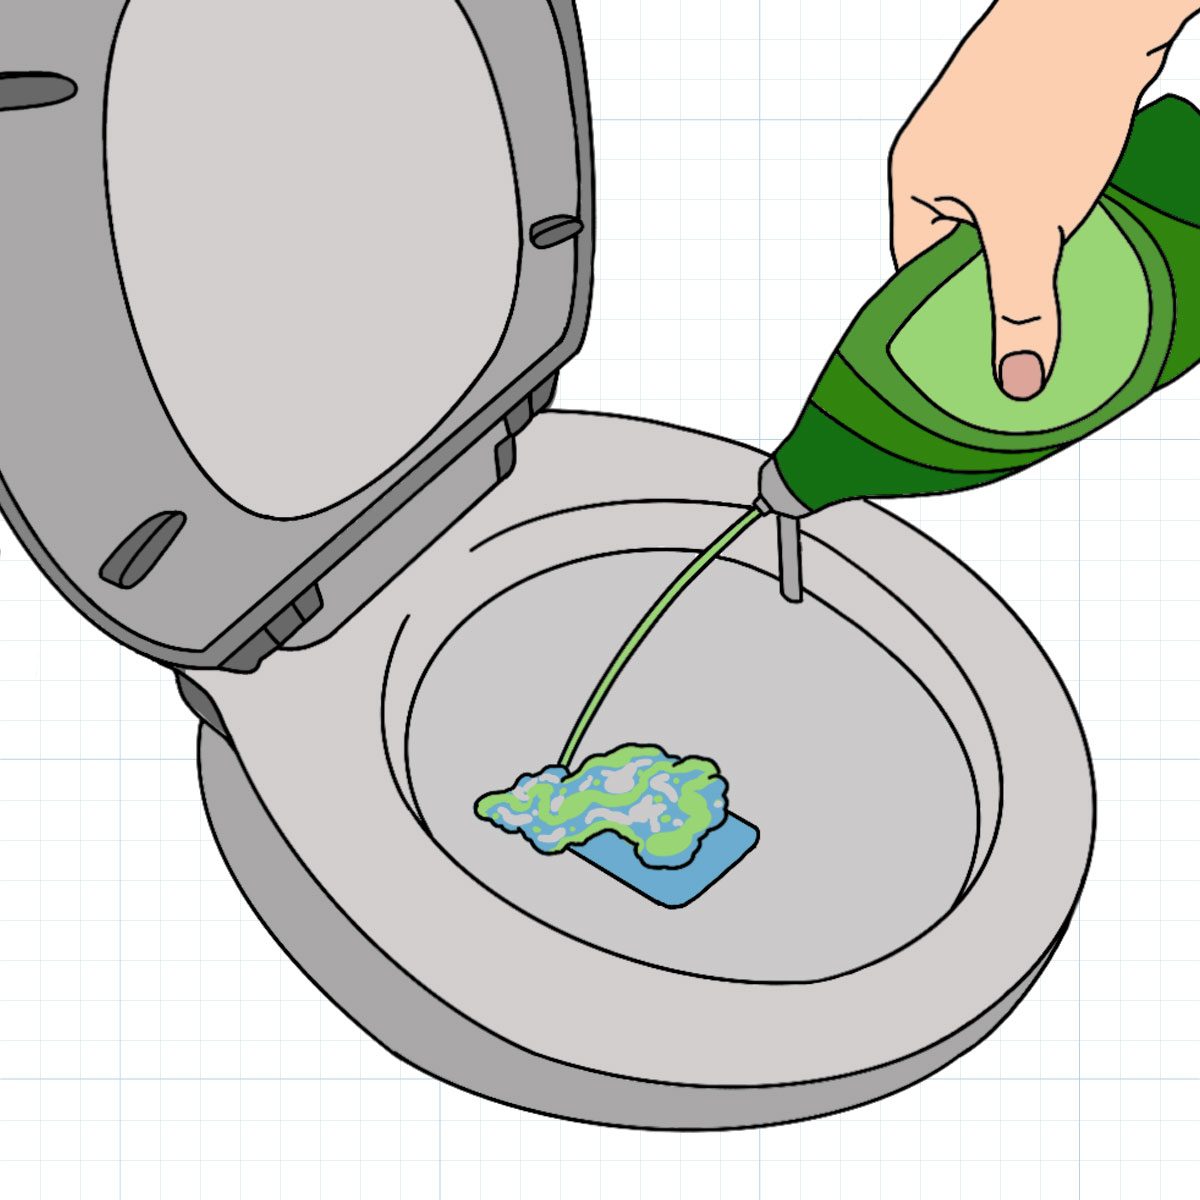 How To Unclog A Toilet Without A Plunger using Dish Soap